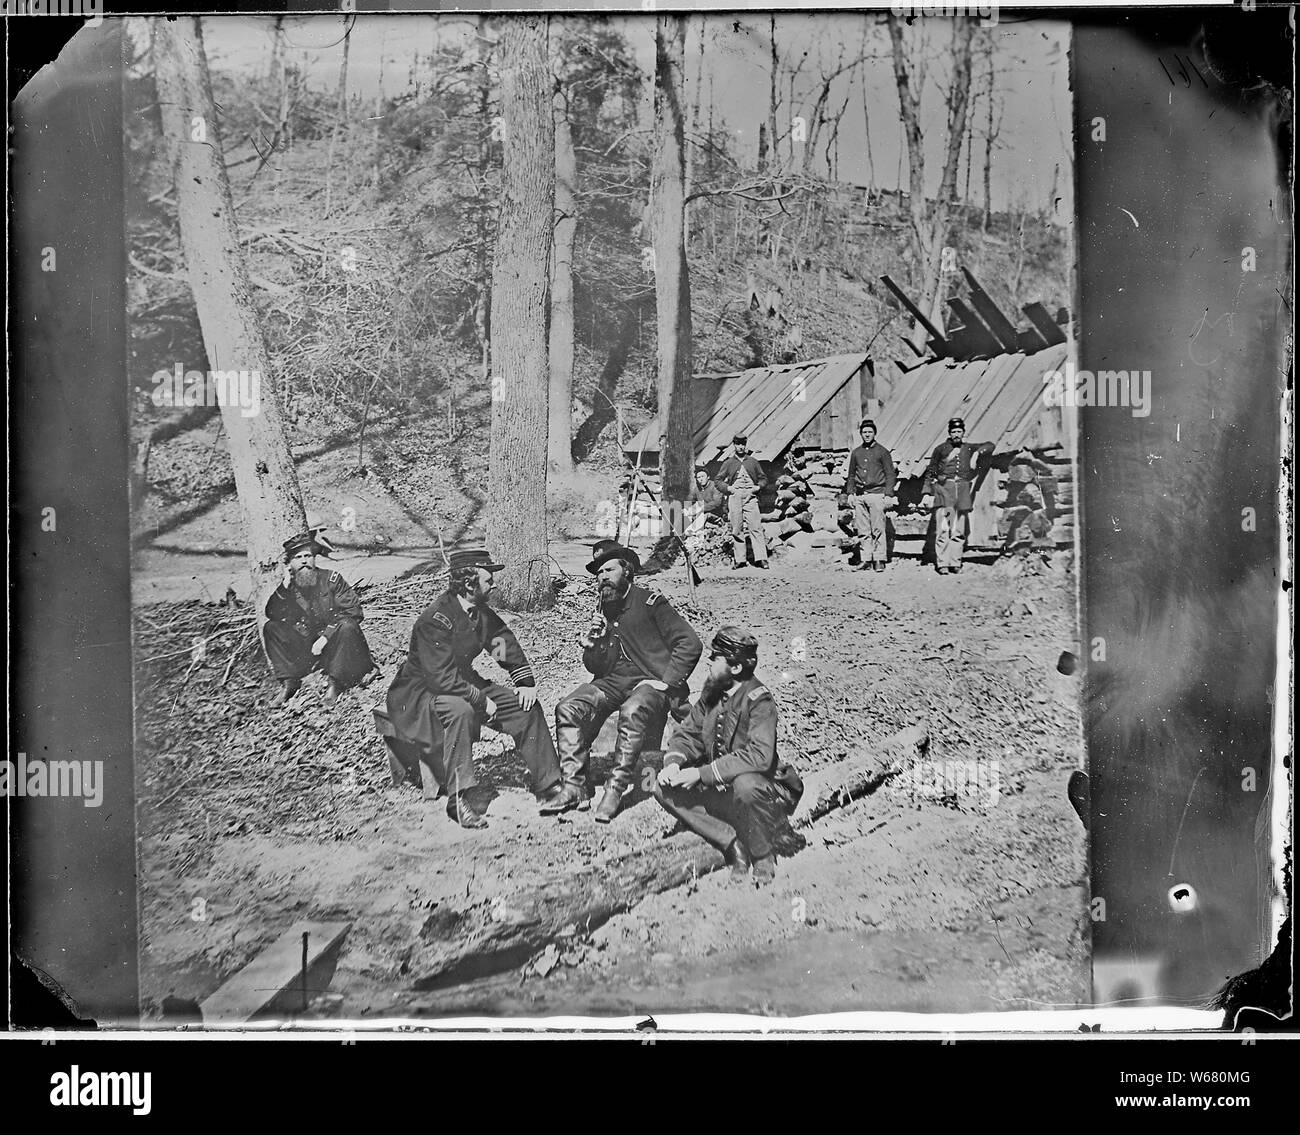 Prof. Maillefert and Naval Officers at Torpedo Station on James River probably taken in April or May 1865. Prof. Maillefert was engaged in removing the torpedoes and obstructions in the James River after close of the War. Stock Photo